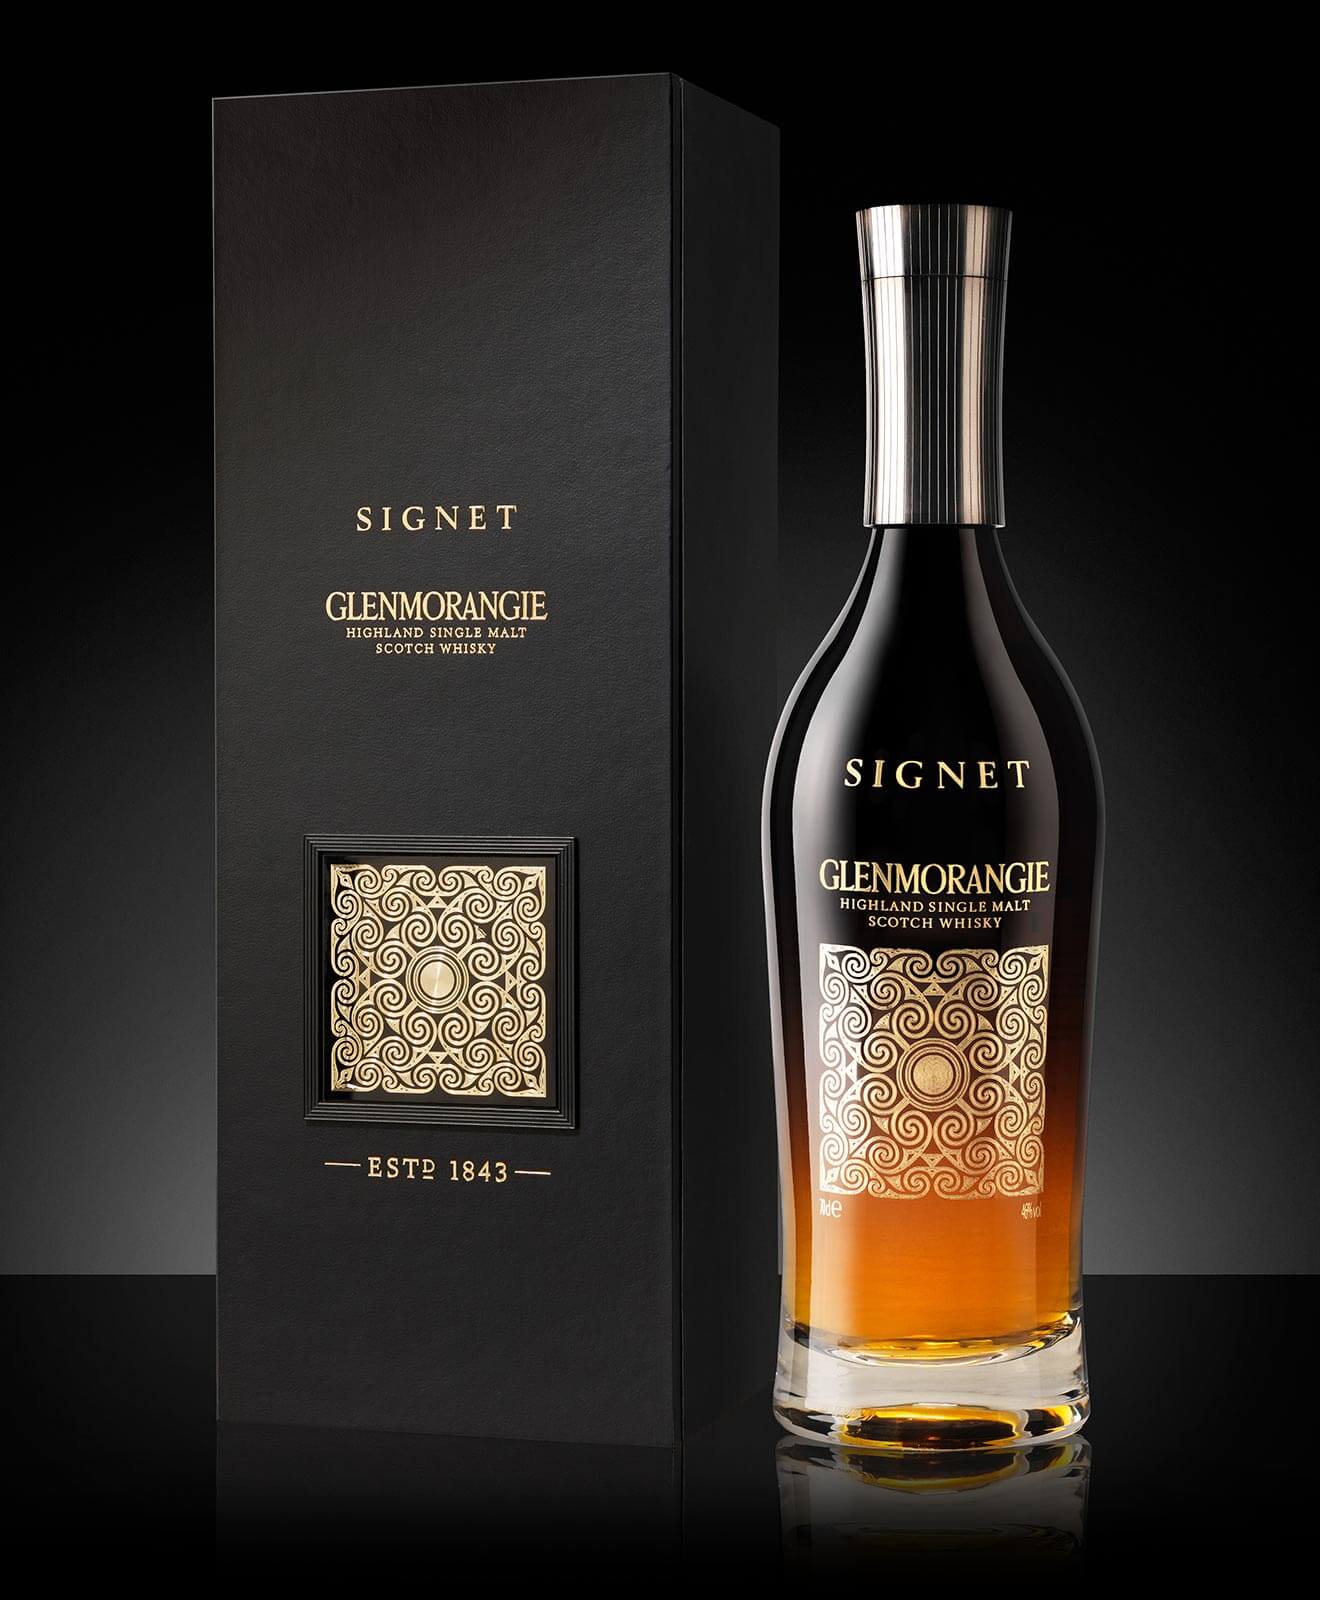 Glenmorangie Signet 10 Year Anniversary, bottle and package